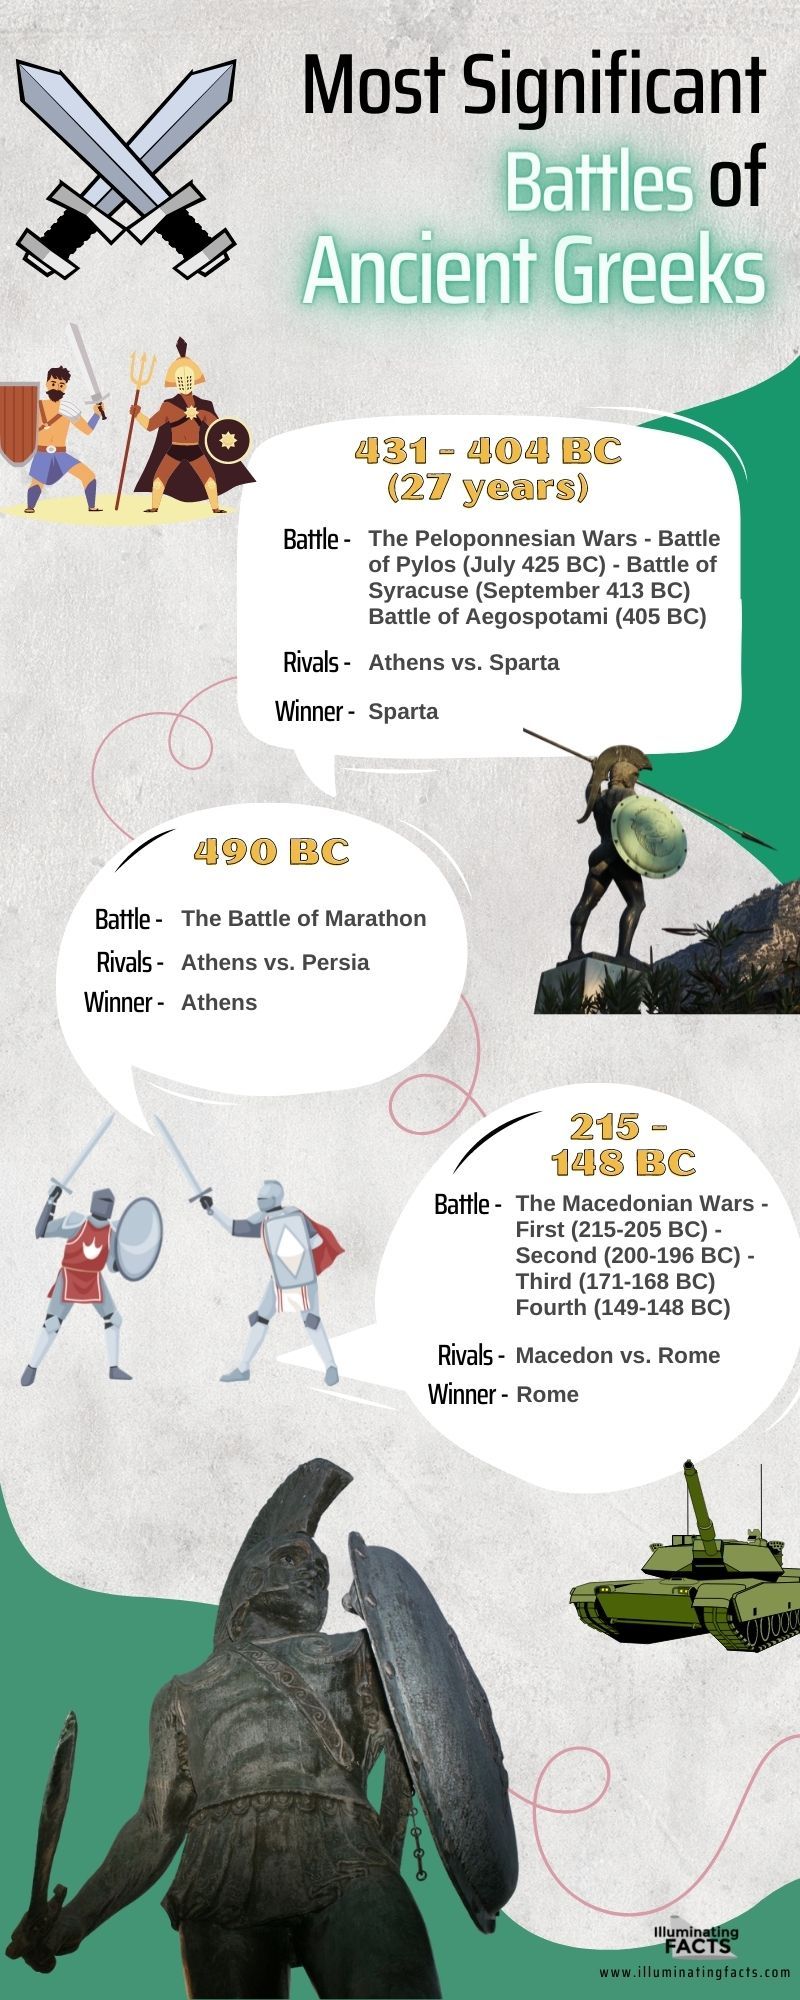 Most Significant Battles of Ancient Greeks